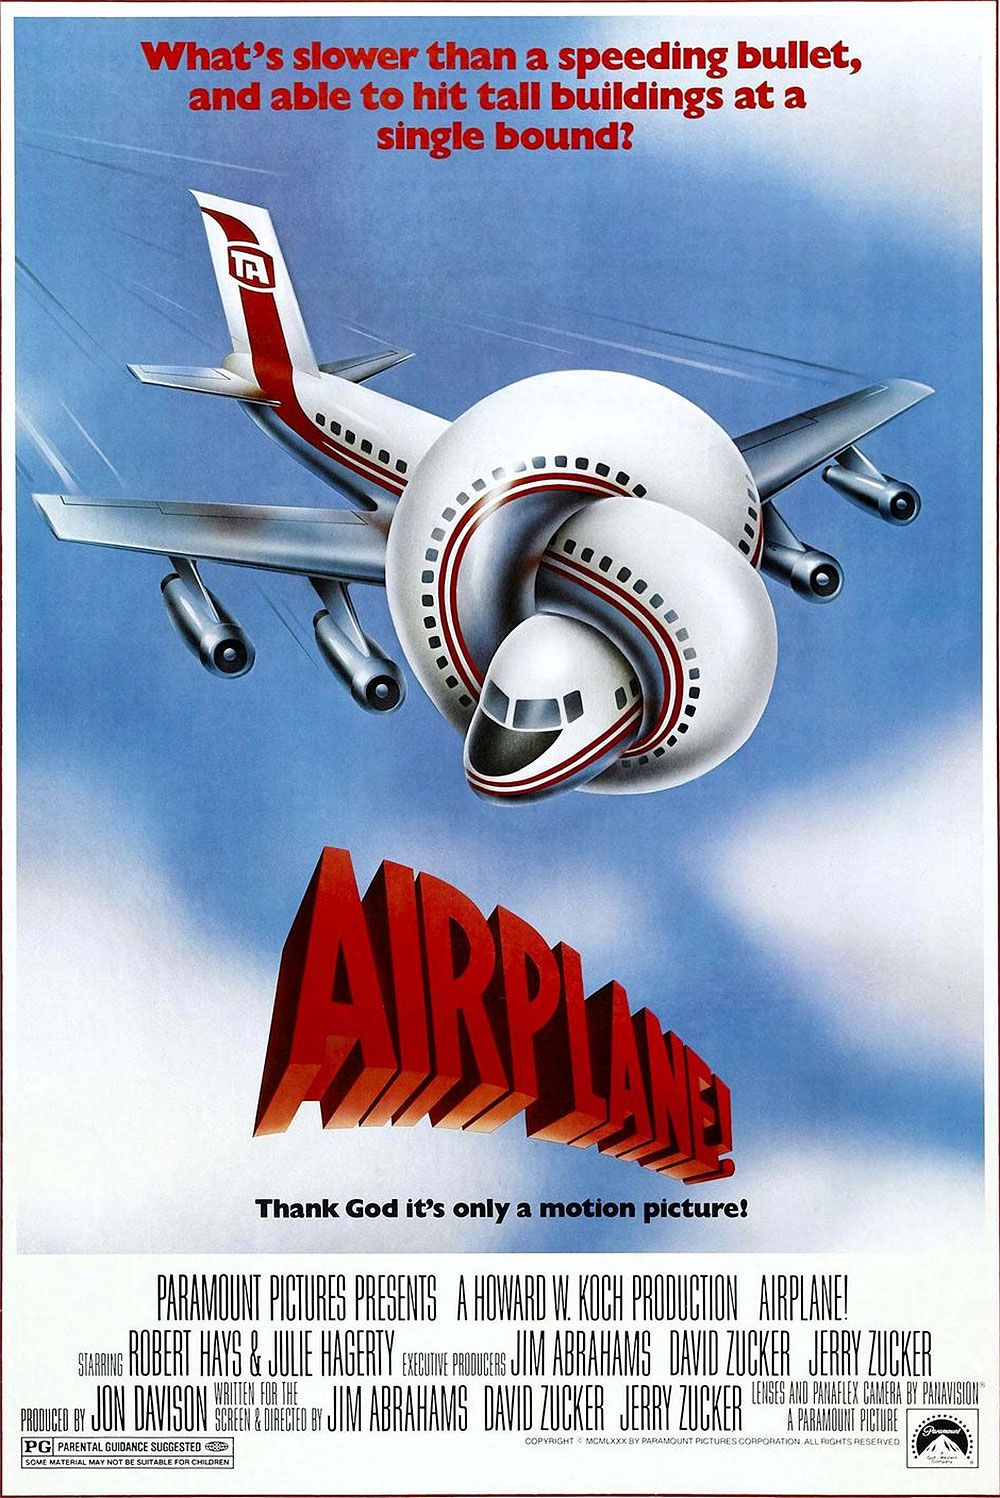 The original 1980s poster for Airplane